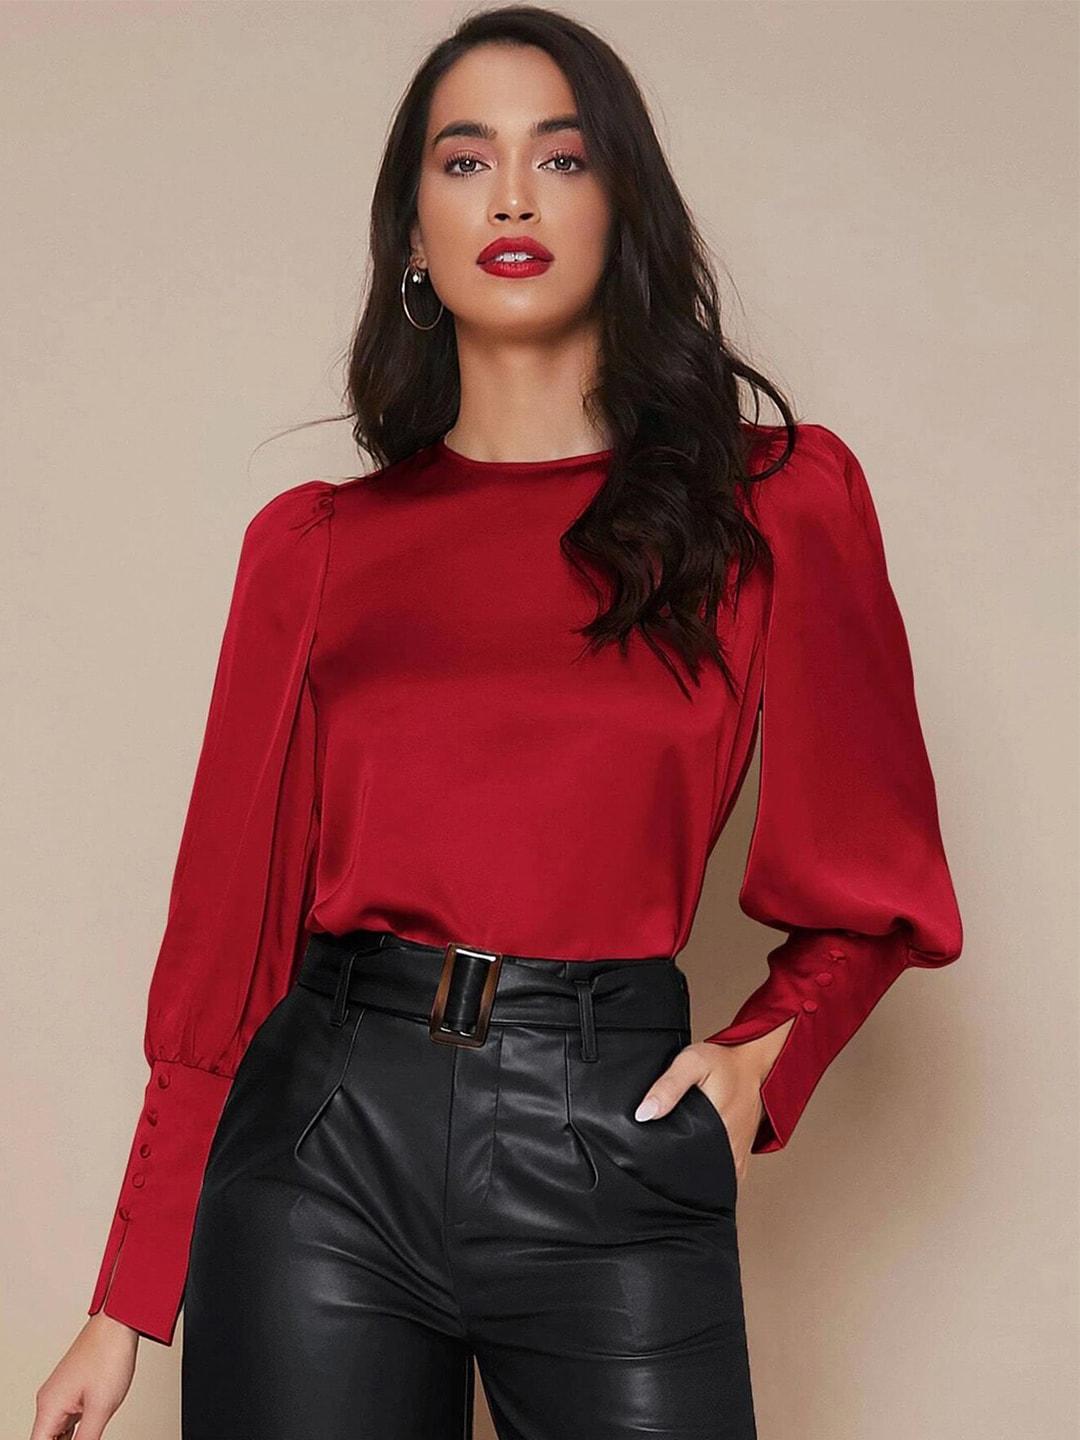 kotty-red-puff-sleeves-satin-top